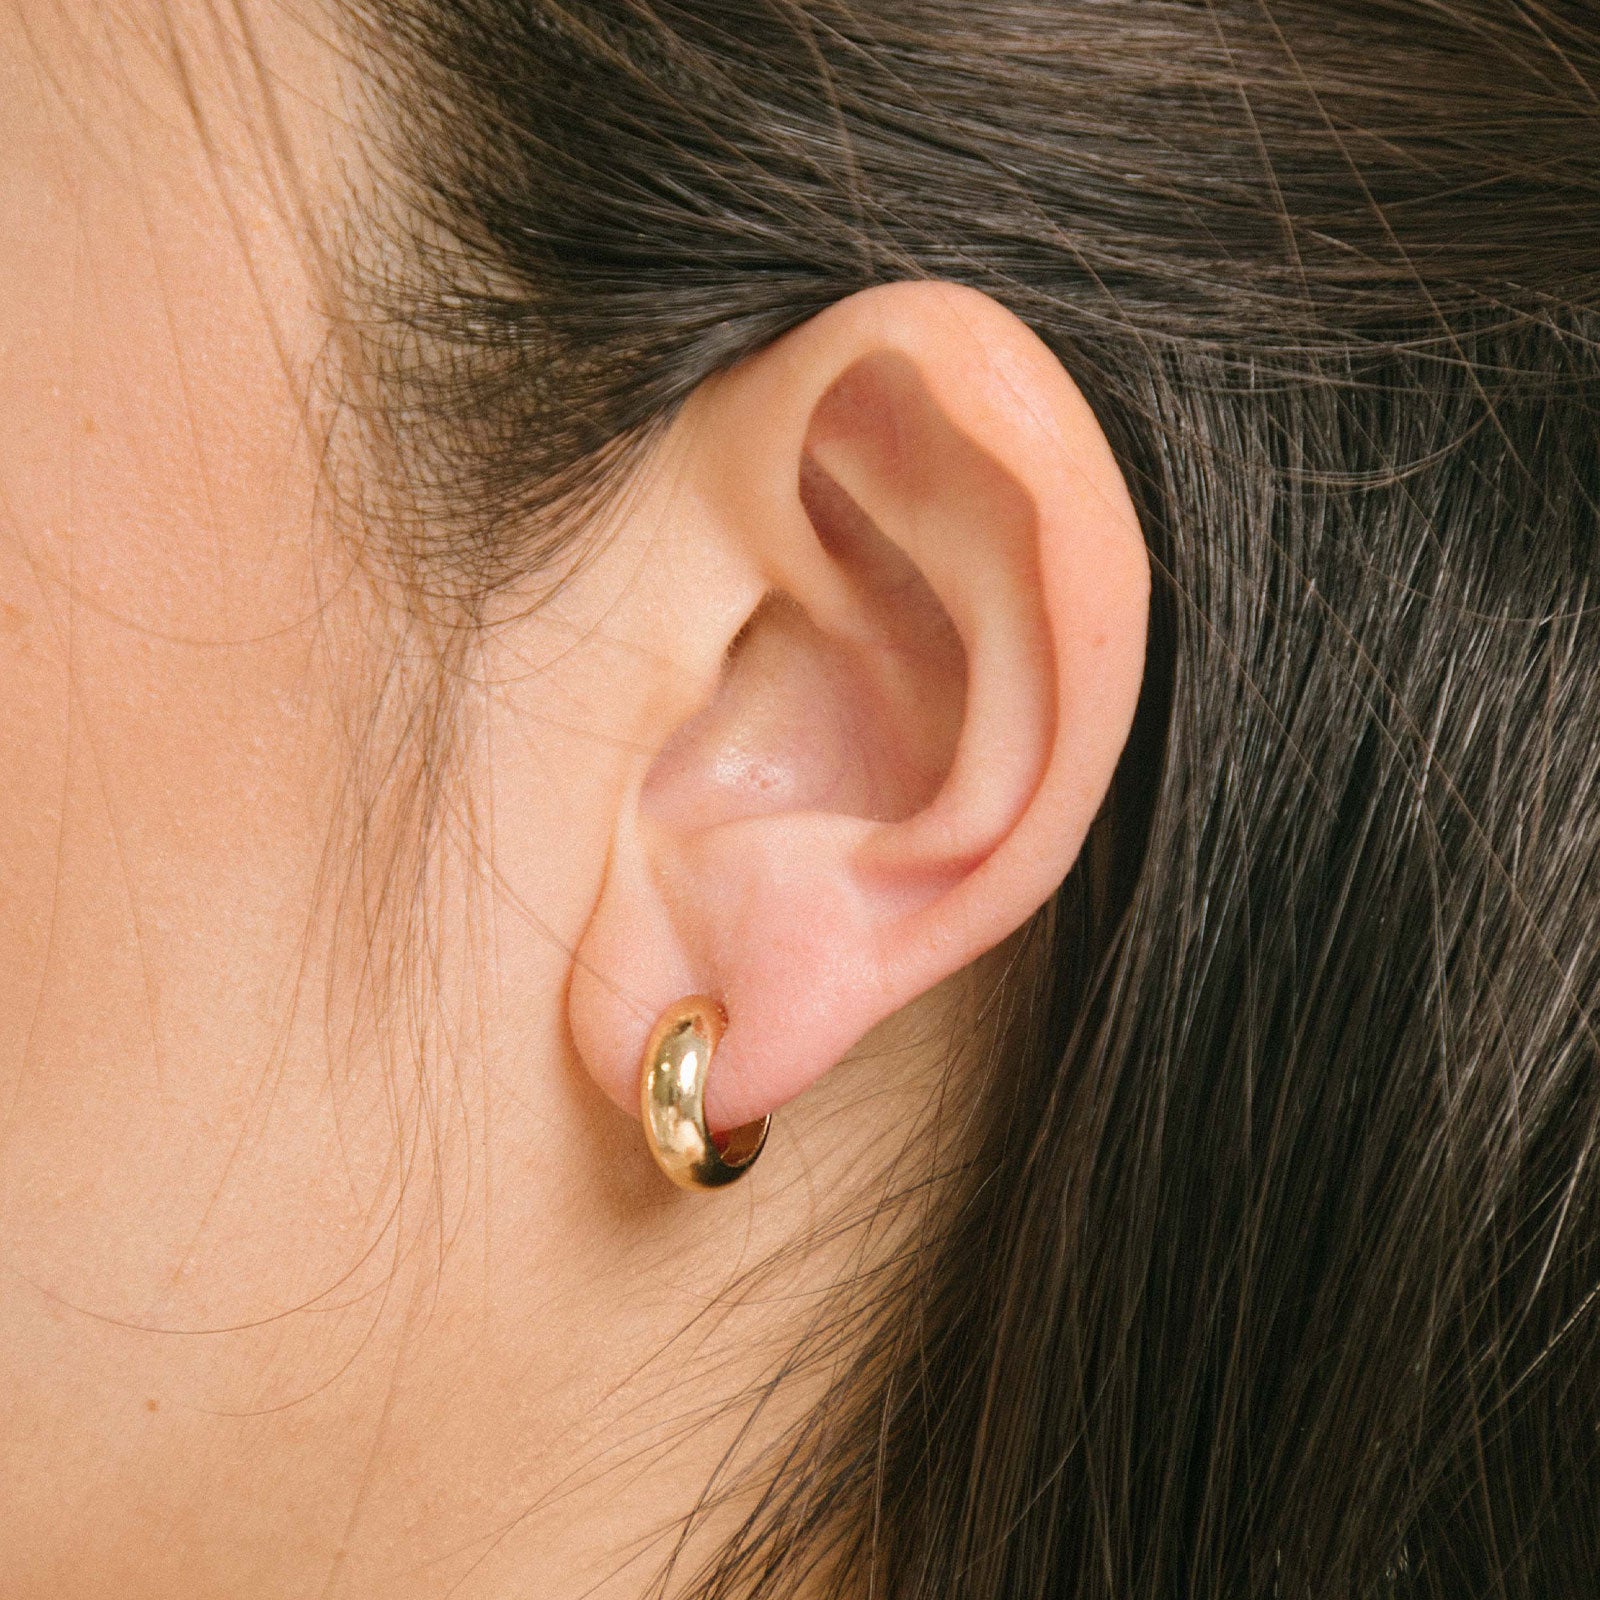 Model wearing the Simple Gold  Huggie Clip-On Earrings provide a medium secure hold, making them perfect for all ear types. With adjustable padding for extra comfort, these earrings can be worn for up to 24 hours with ease.